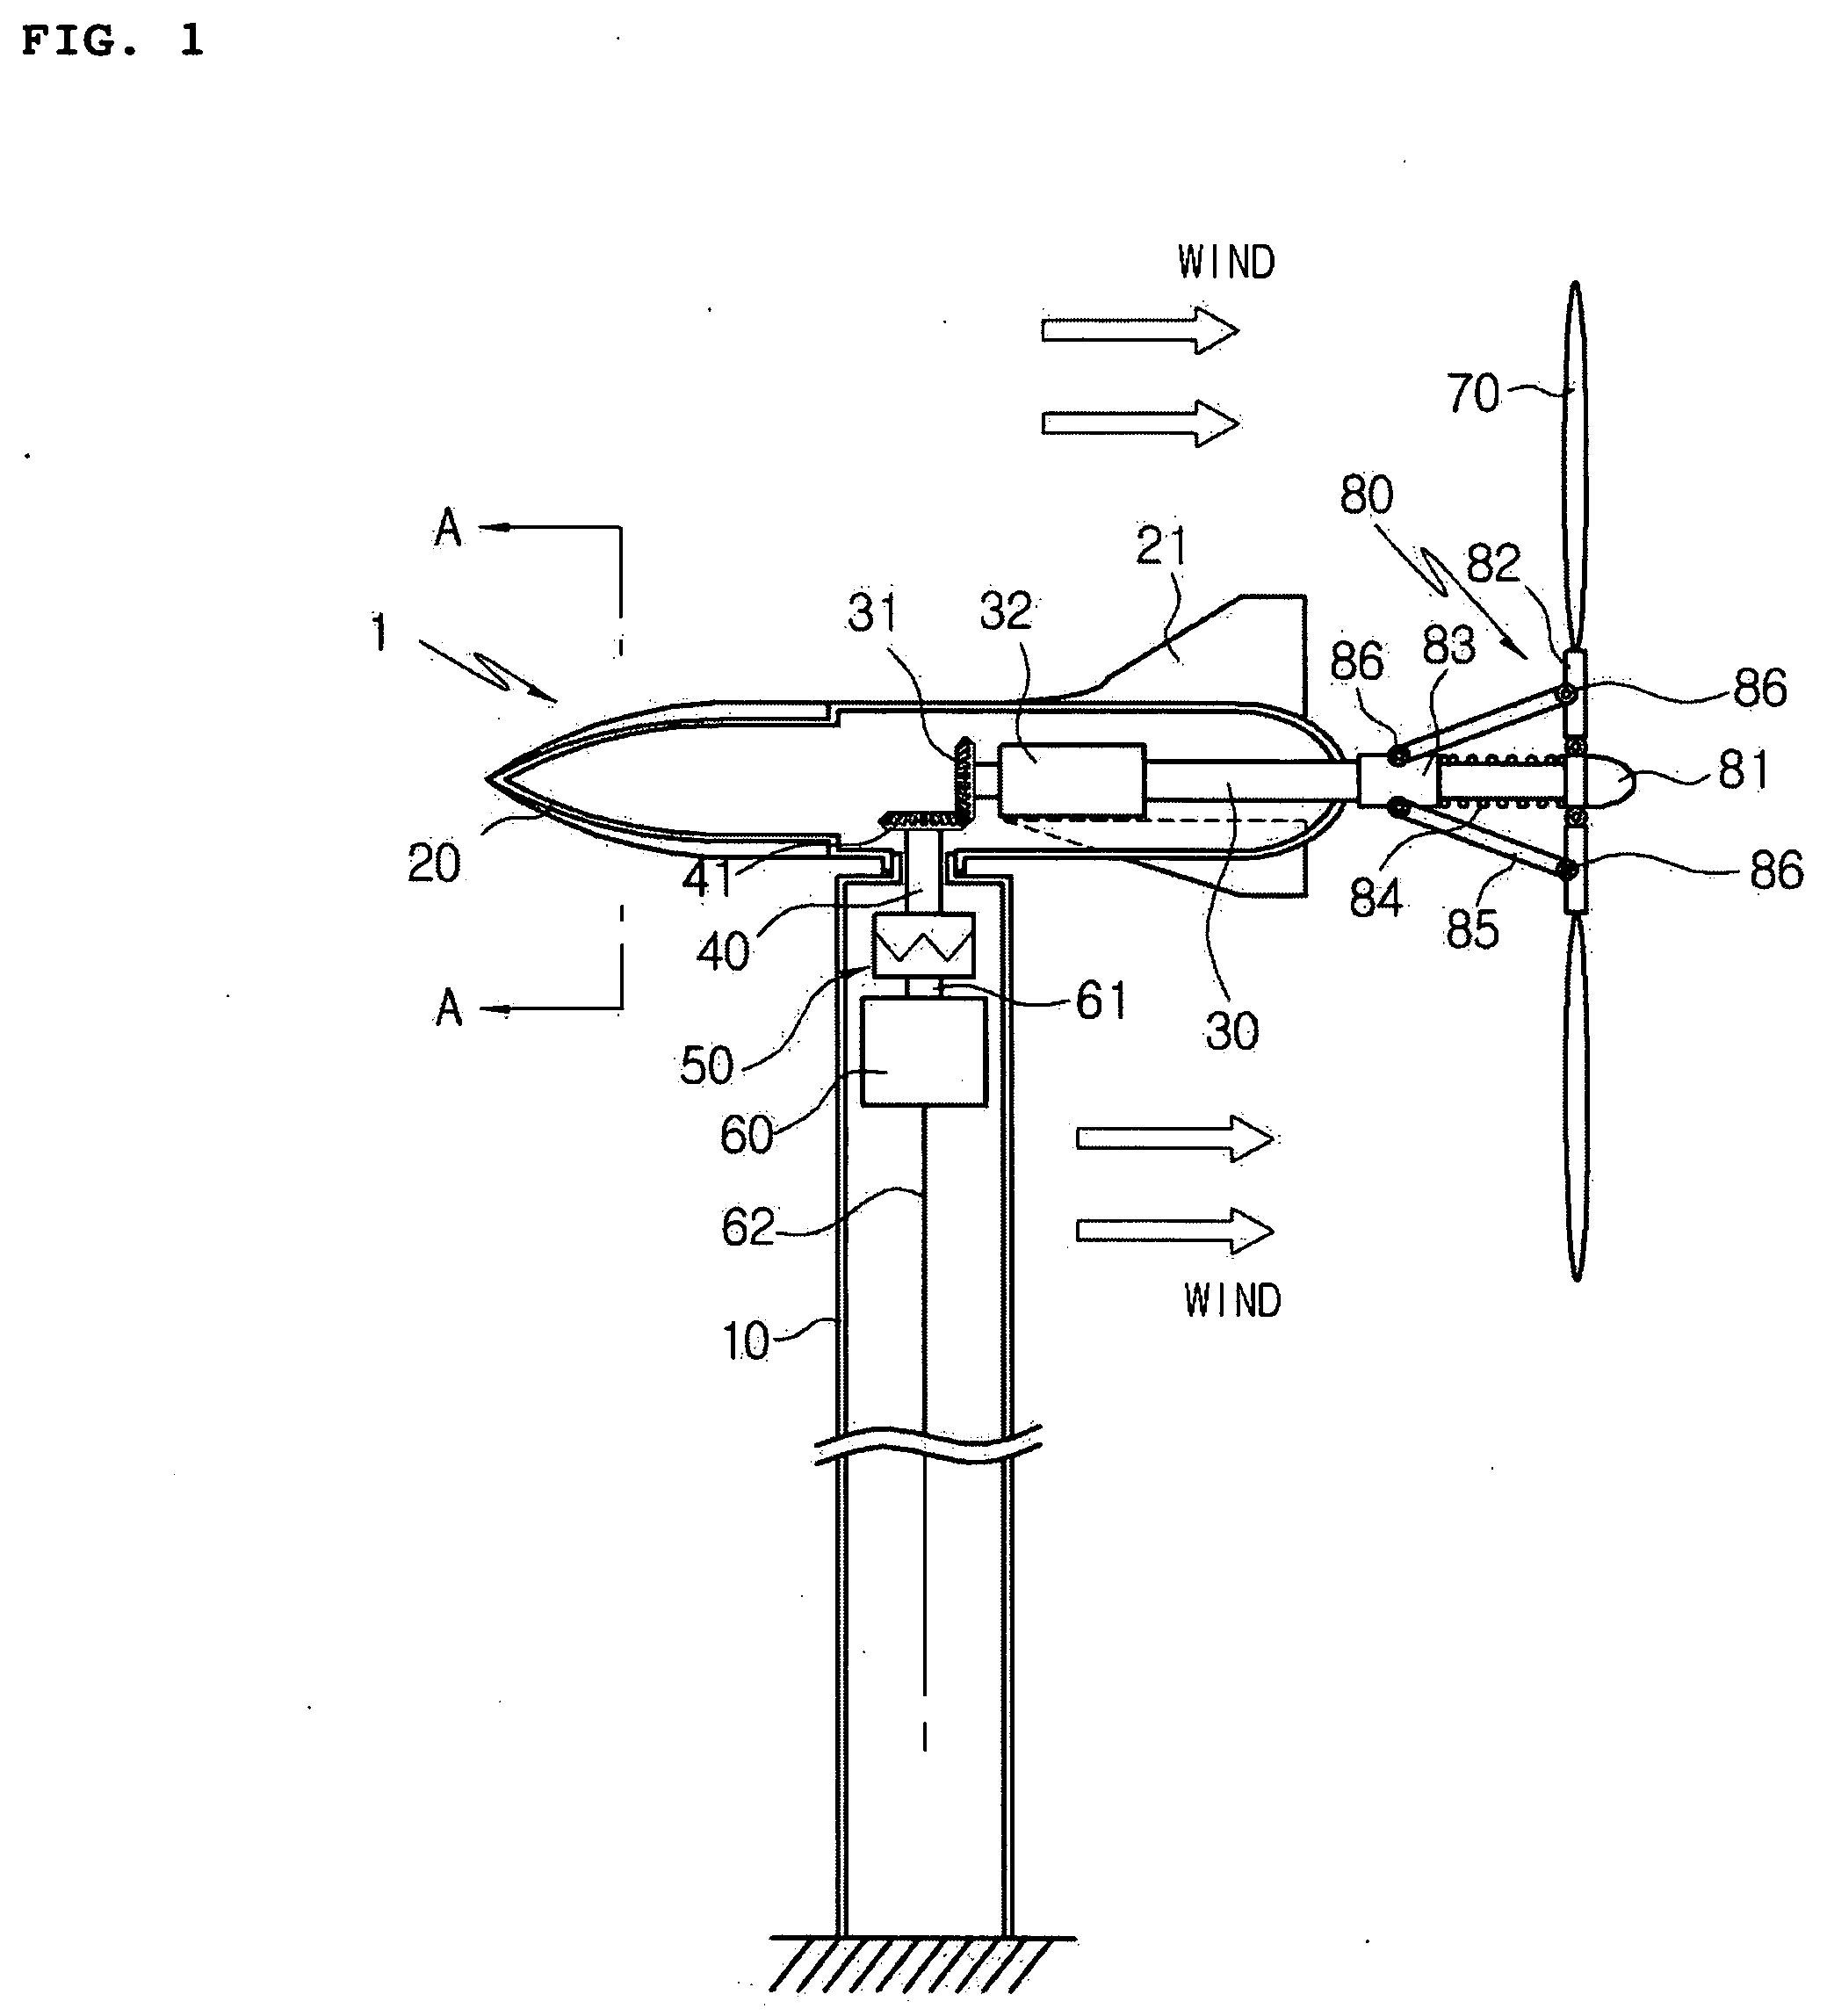 Wind driven power generating system